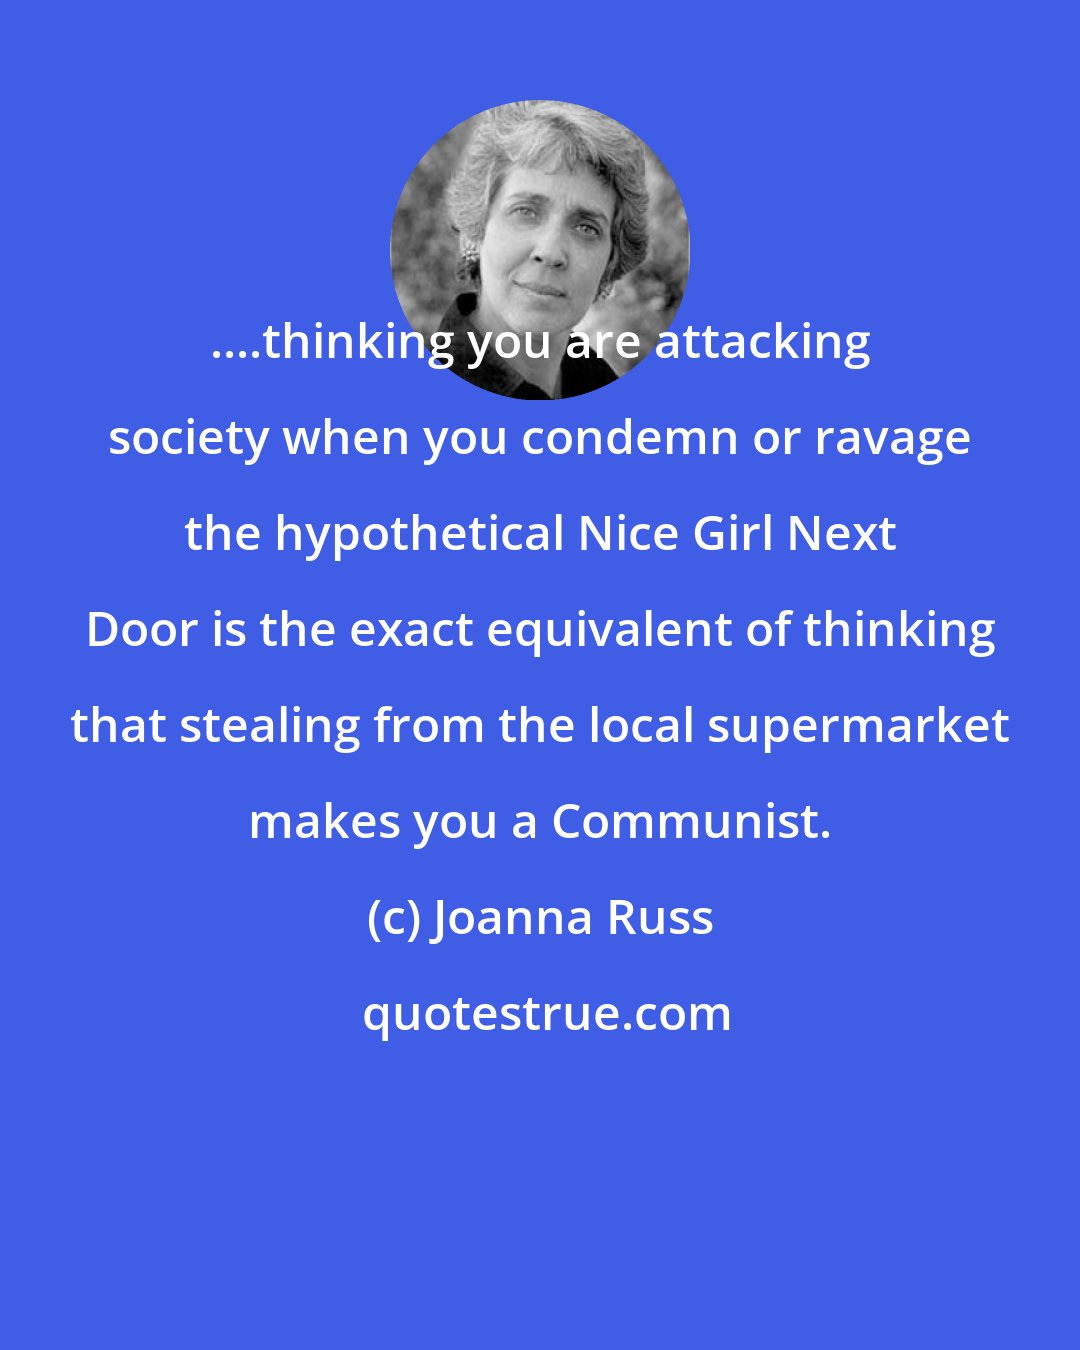 Joanna Russ: ....thinking you are attacking society when you condemn or ravage the hypothetical Nice Girl Next Door is the exact equivalent of thinking that stealing from the local supermarket makes you a Communist.